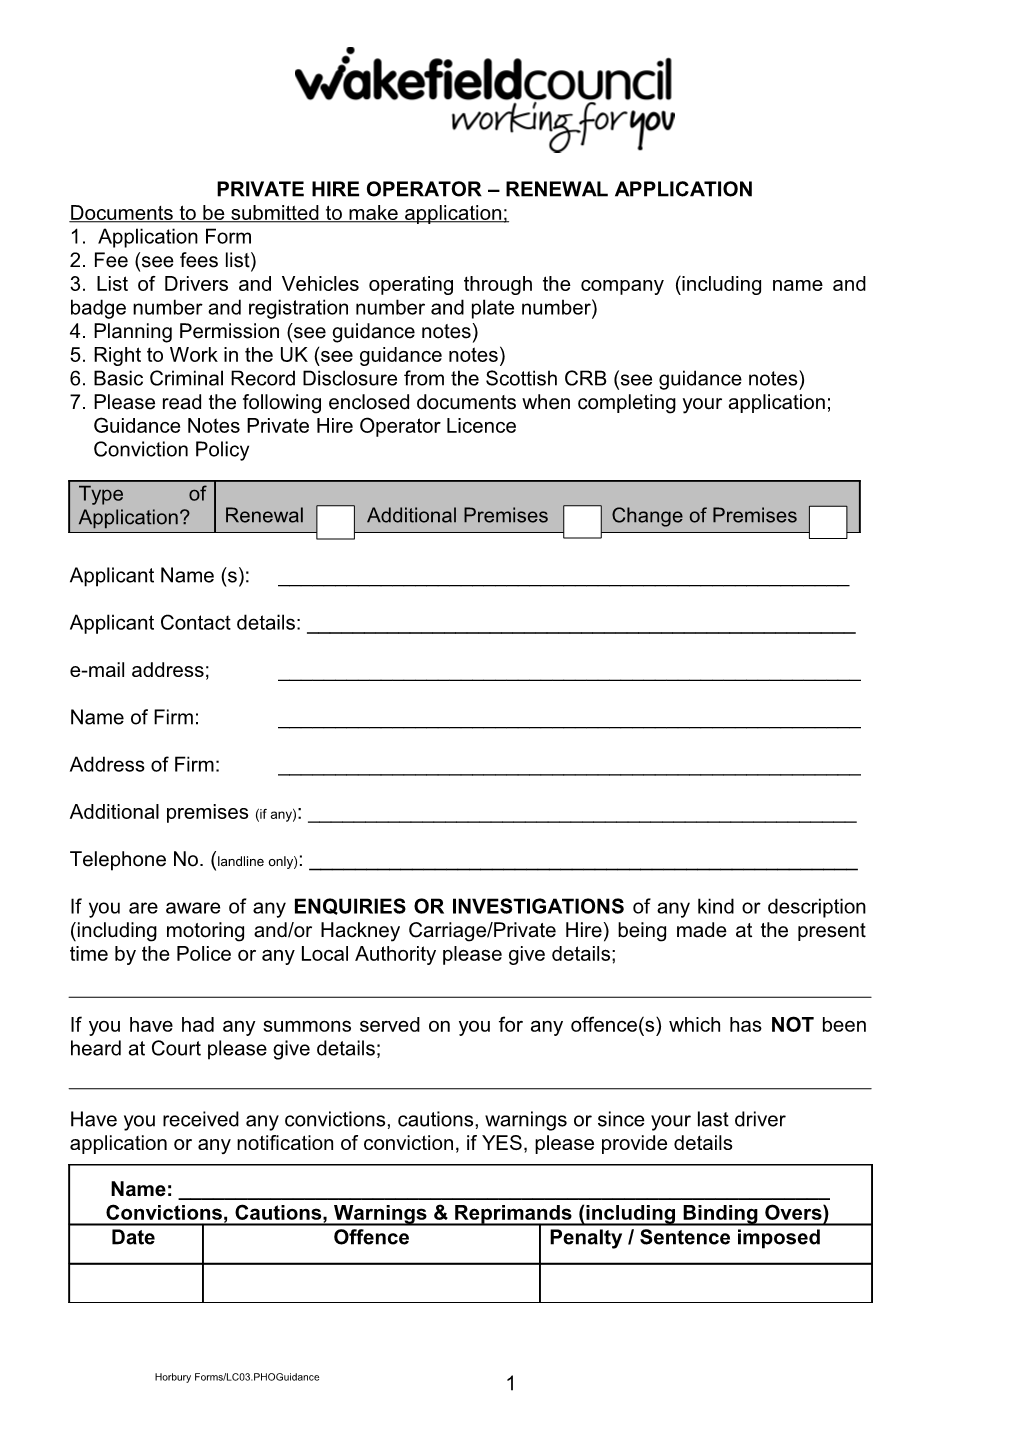 Private Hire Operator Renewal Application Form